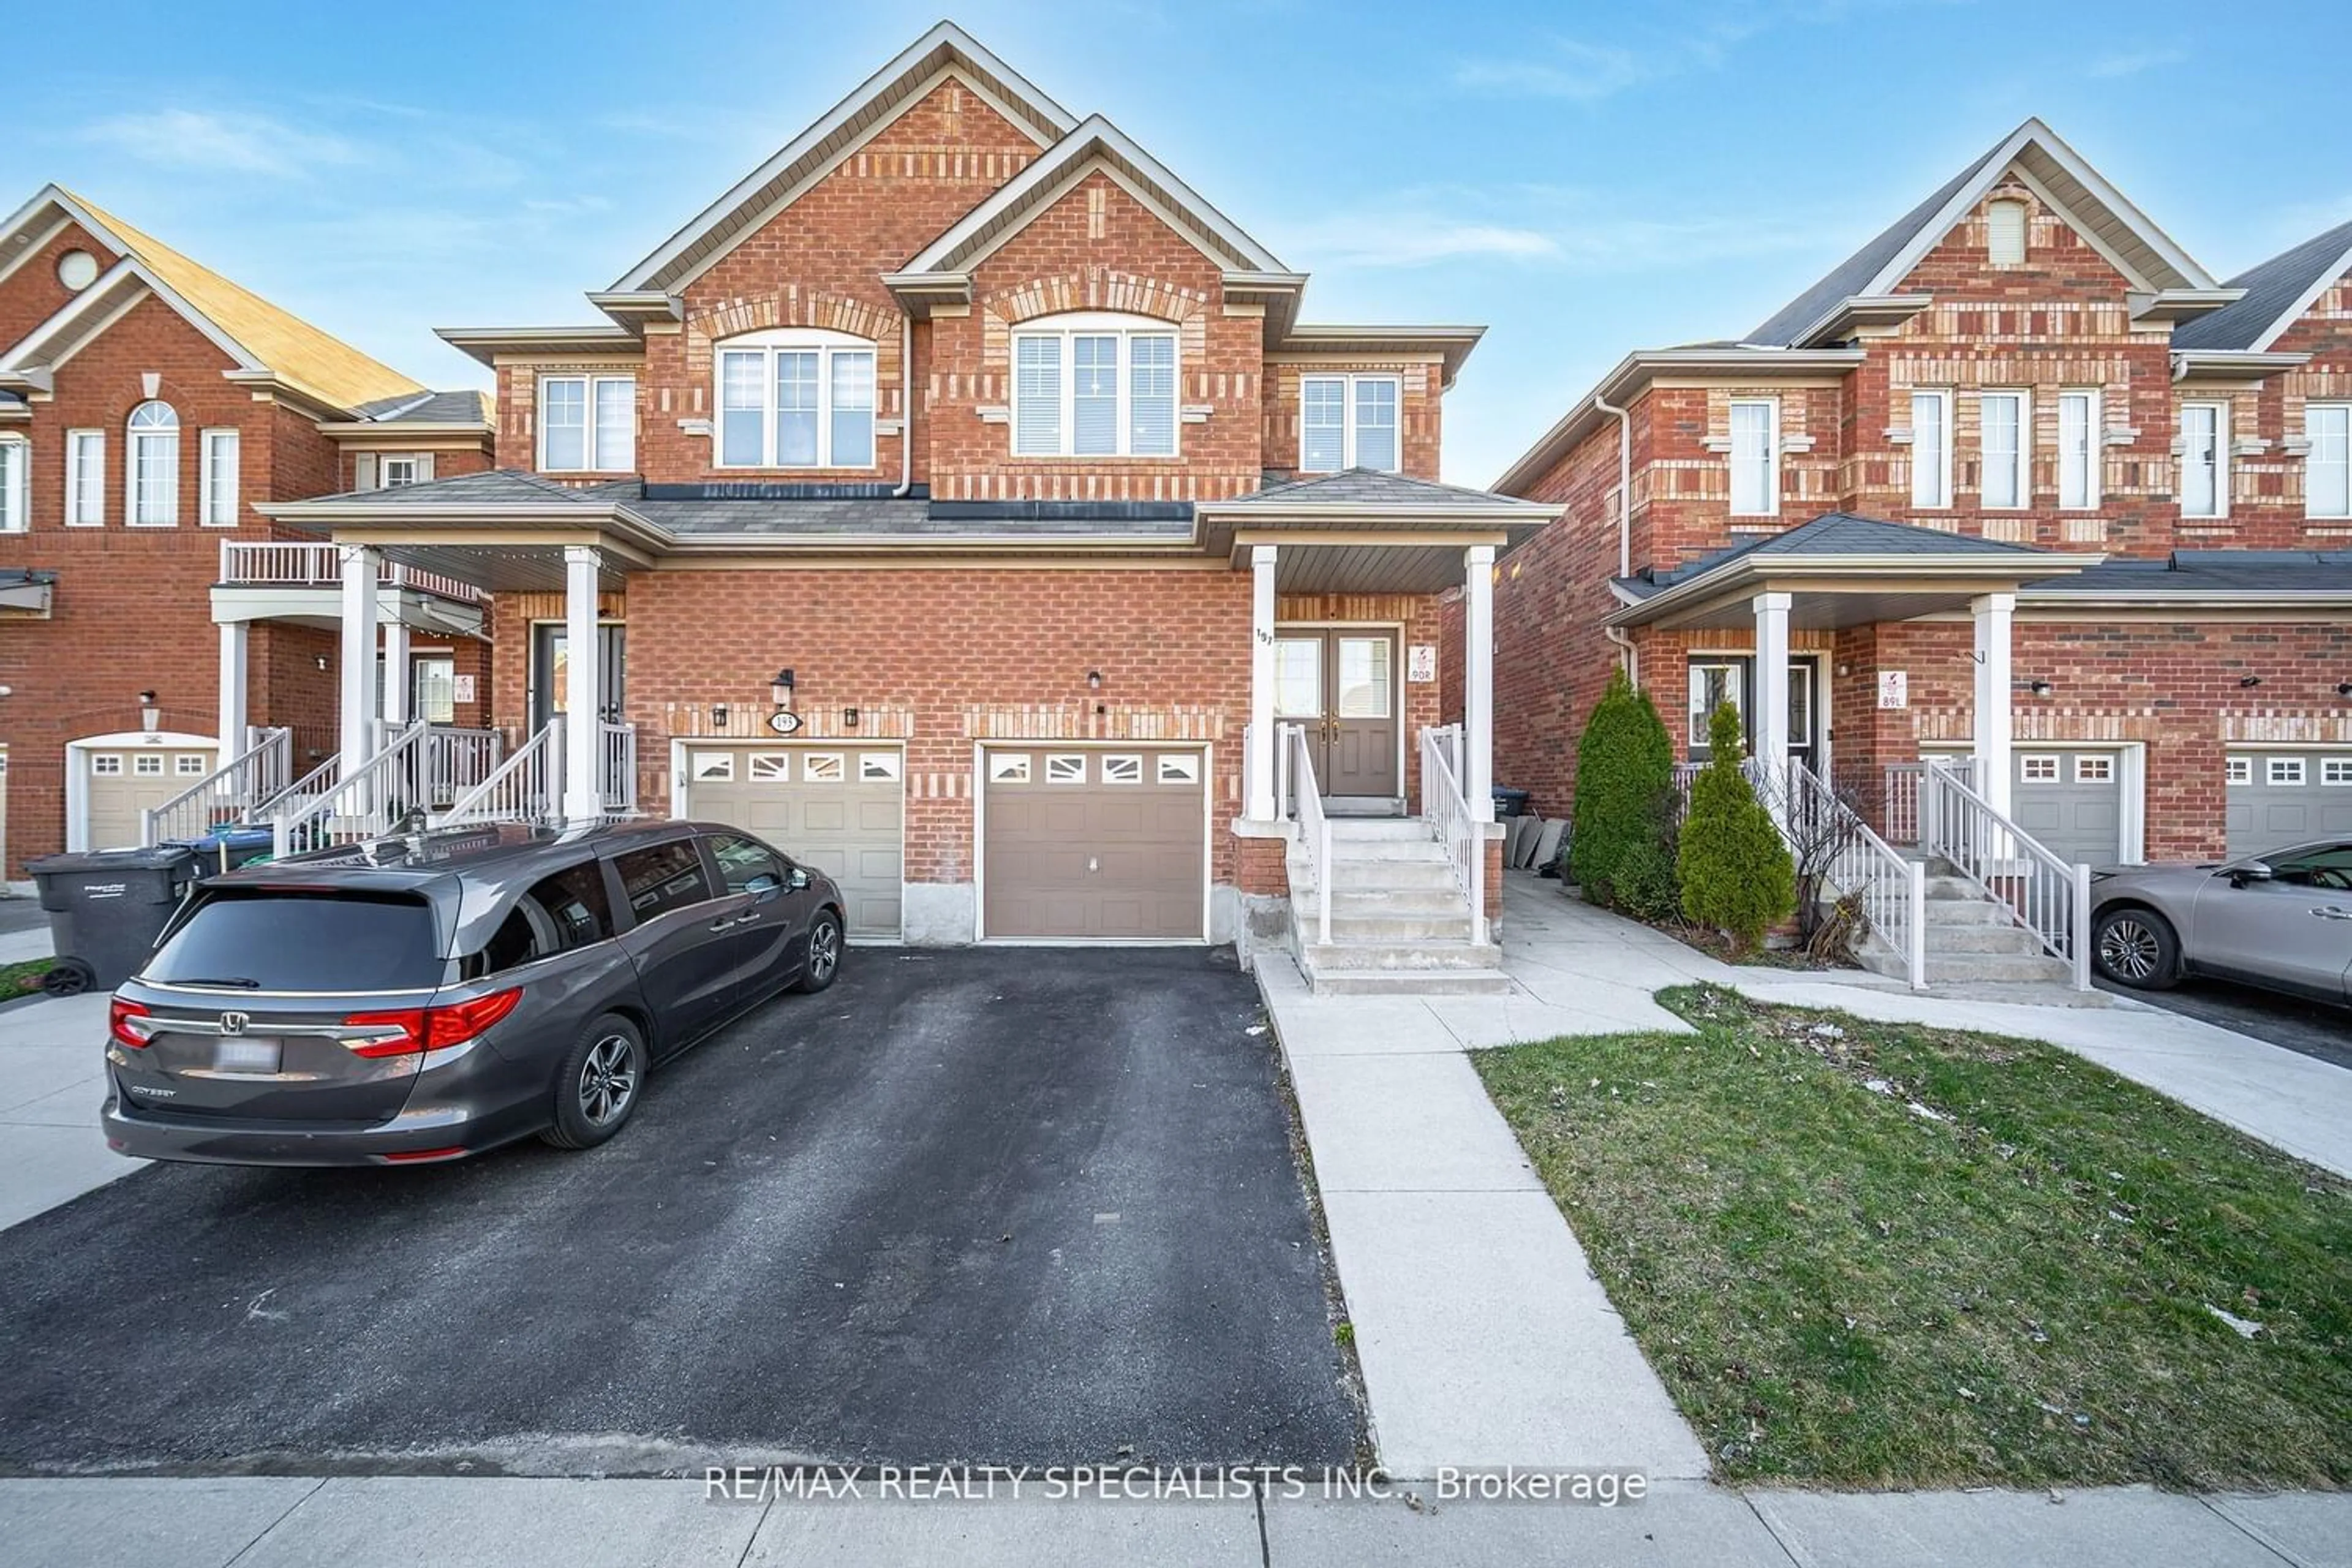 Home with brick exterior material for 197 Checkerberry Cres, Brampton Ontario L6R 2S6